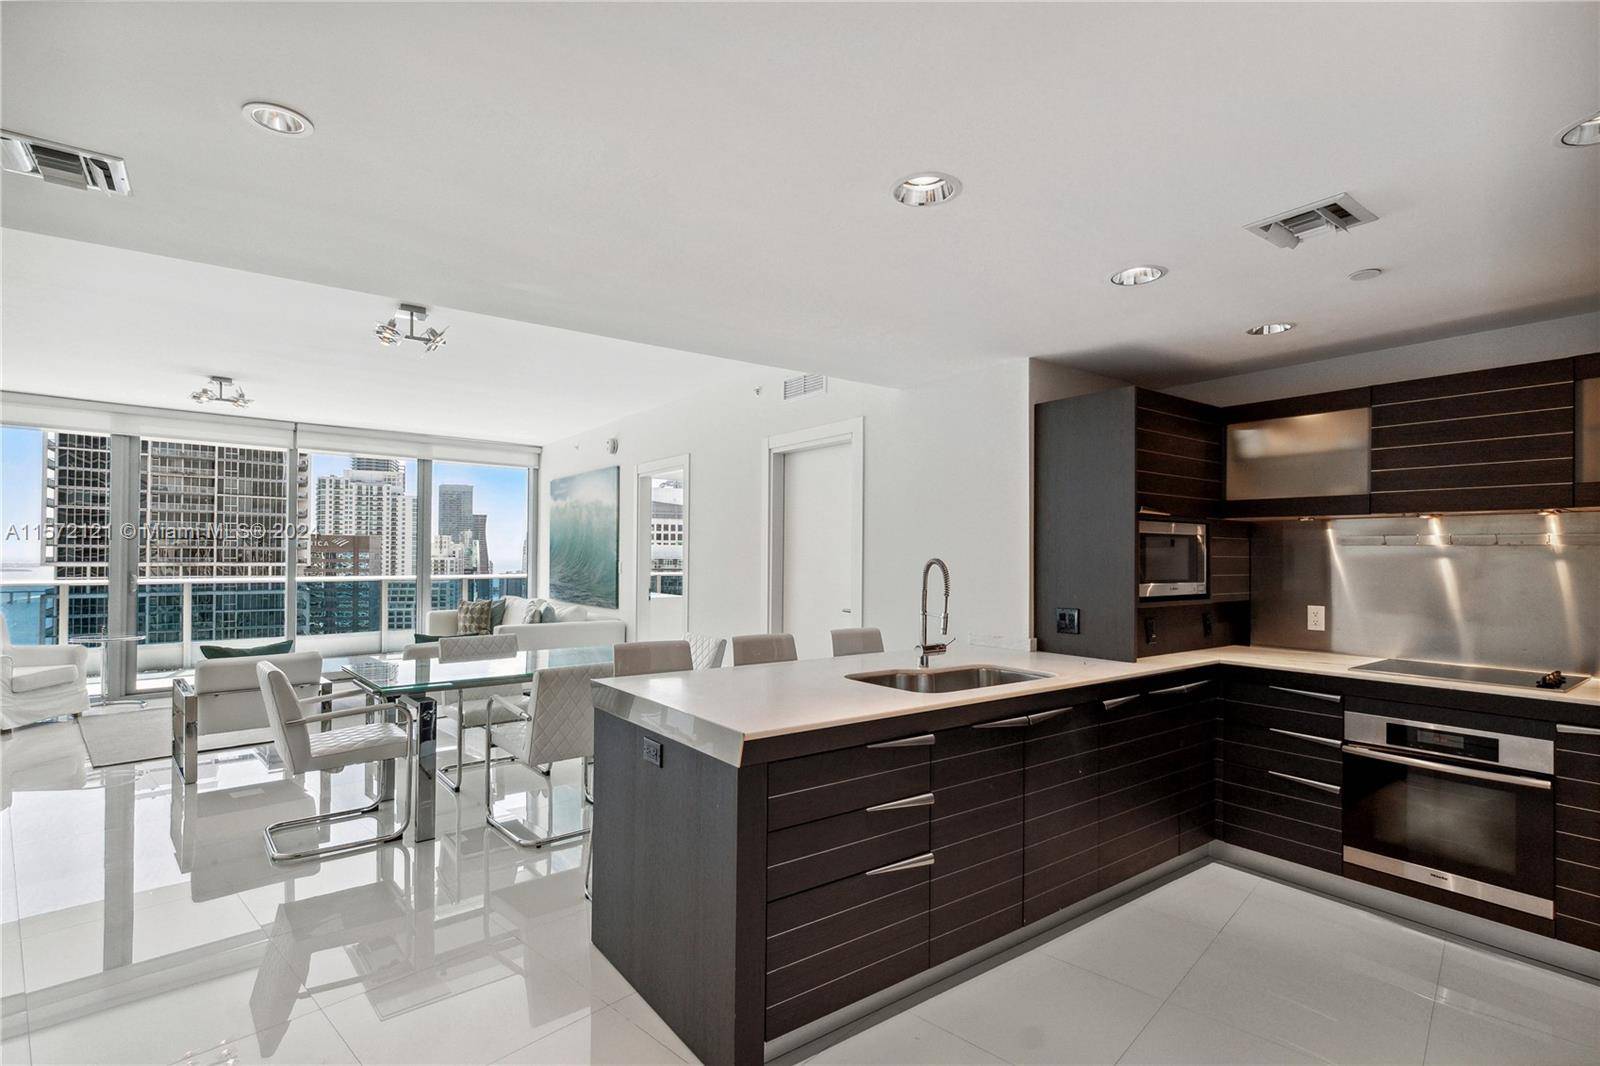 The most prestigious hotel condominium in Downtown Miami, located in the Central Business District, walking distance to the heart of Brickell, 15 minutes to Miami Intl.